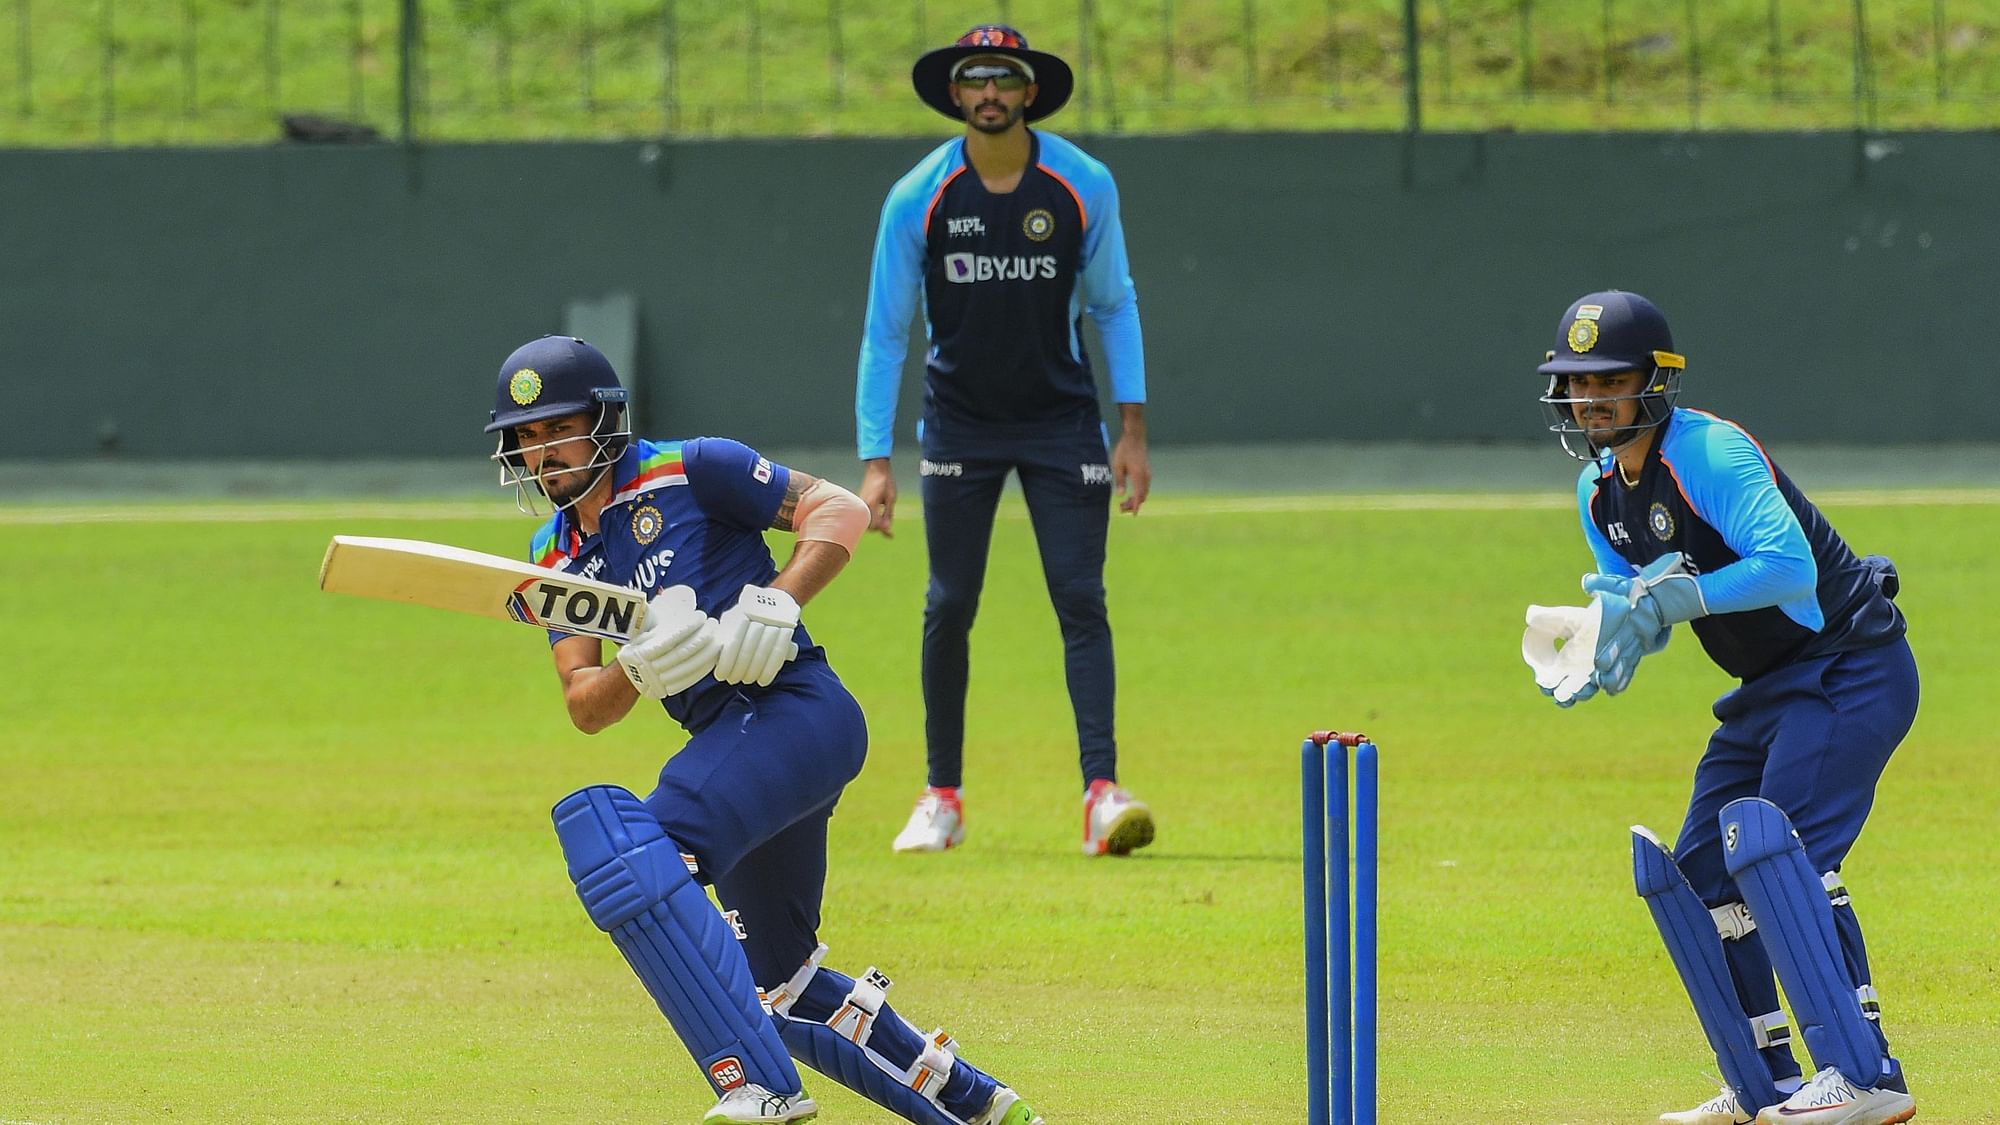 <div class="paragraphs"><p>Manish Pandey batting during the intra-squad game in Colombo.&nbsp;</p></div>